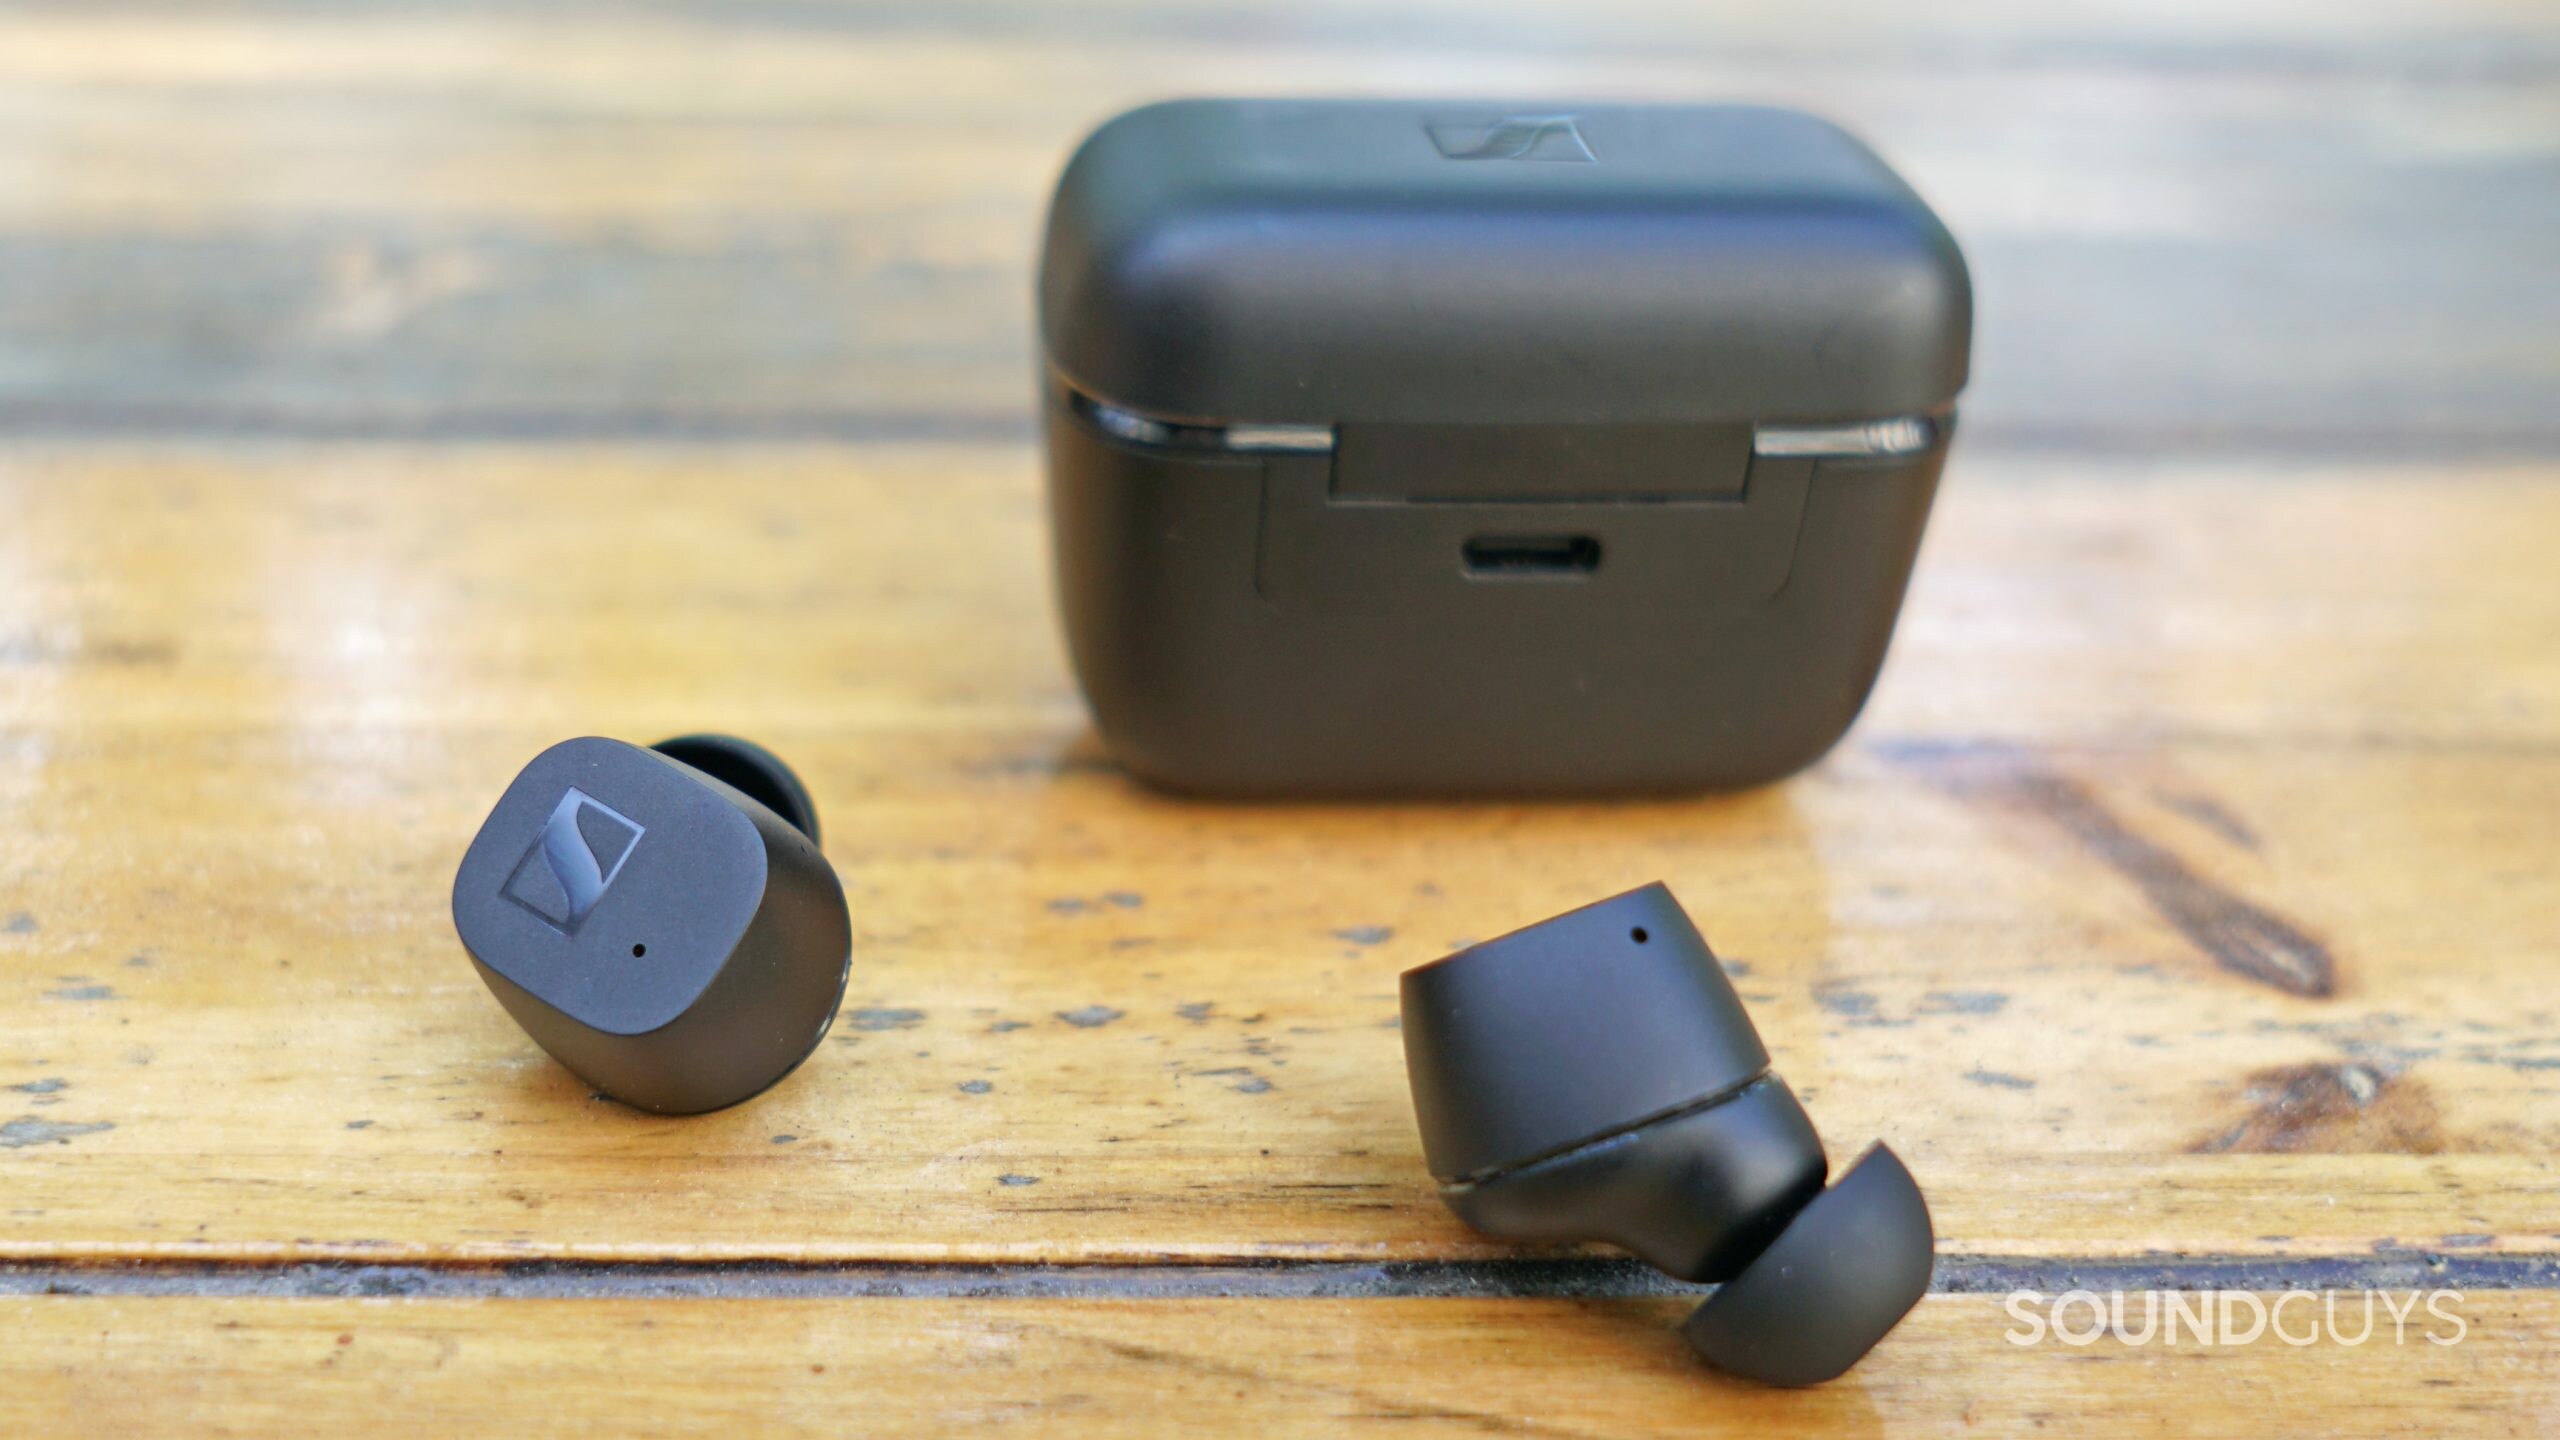 The Sennheiser CX True Wireless earbuds lay in front of its charging case, with its charging case in view.